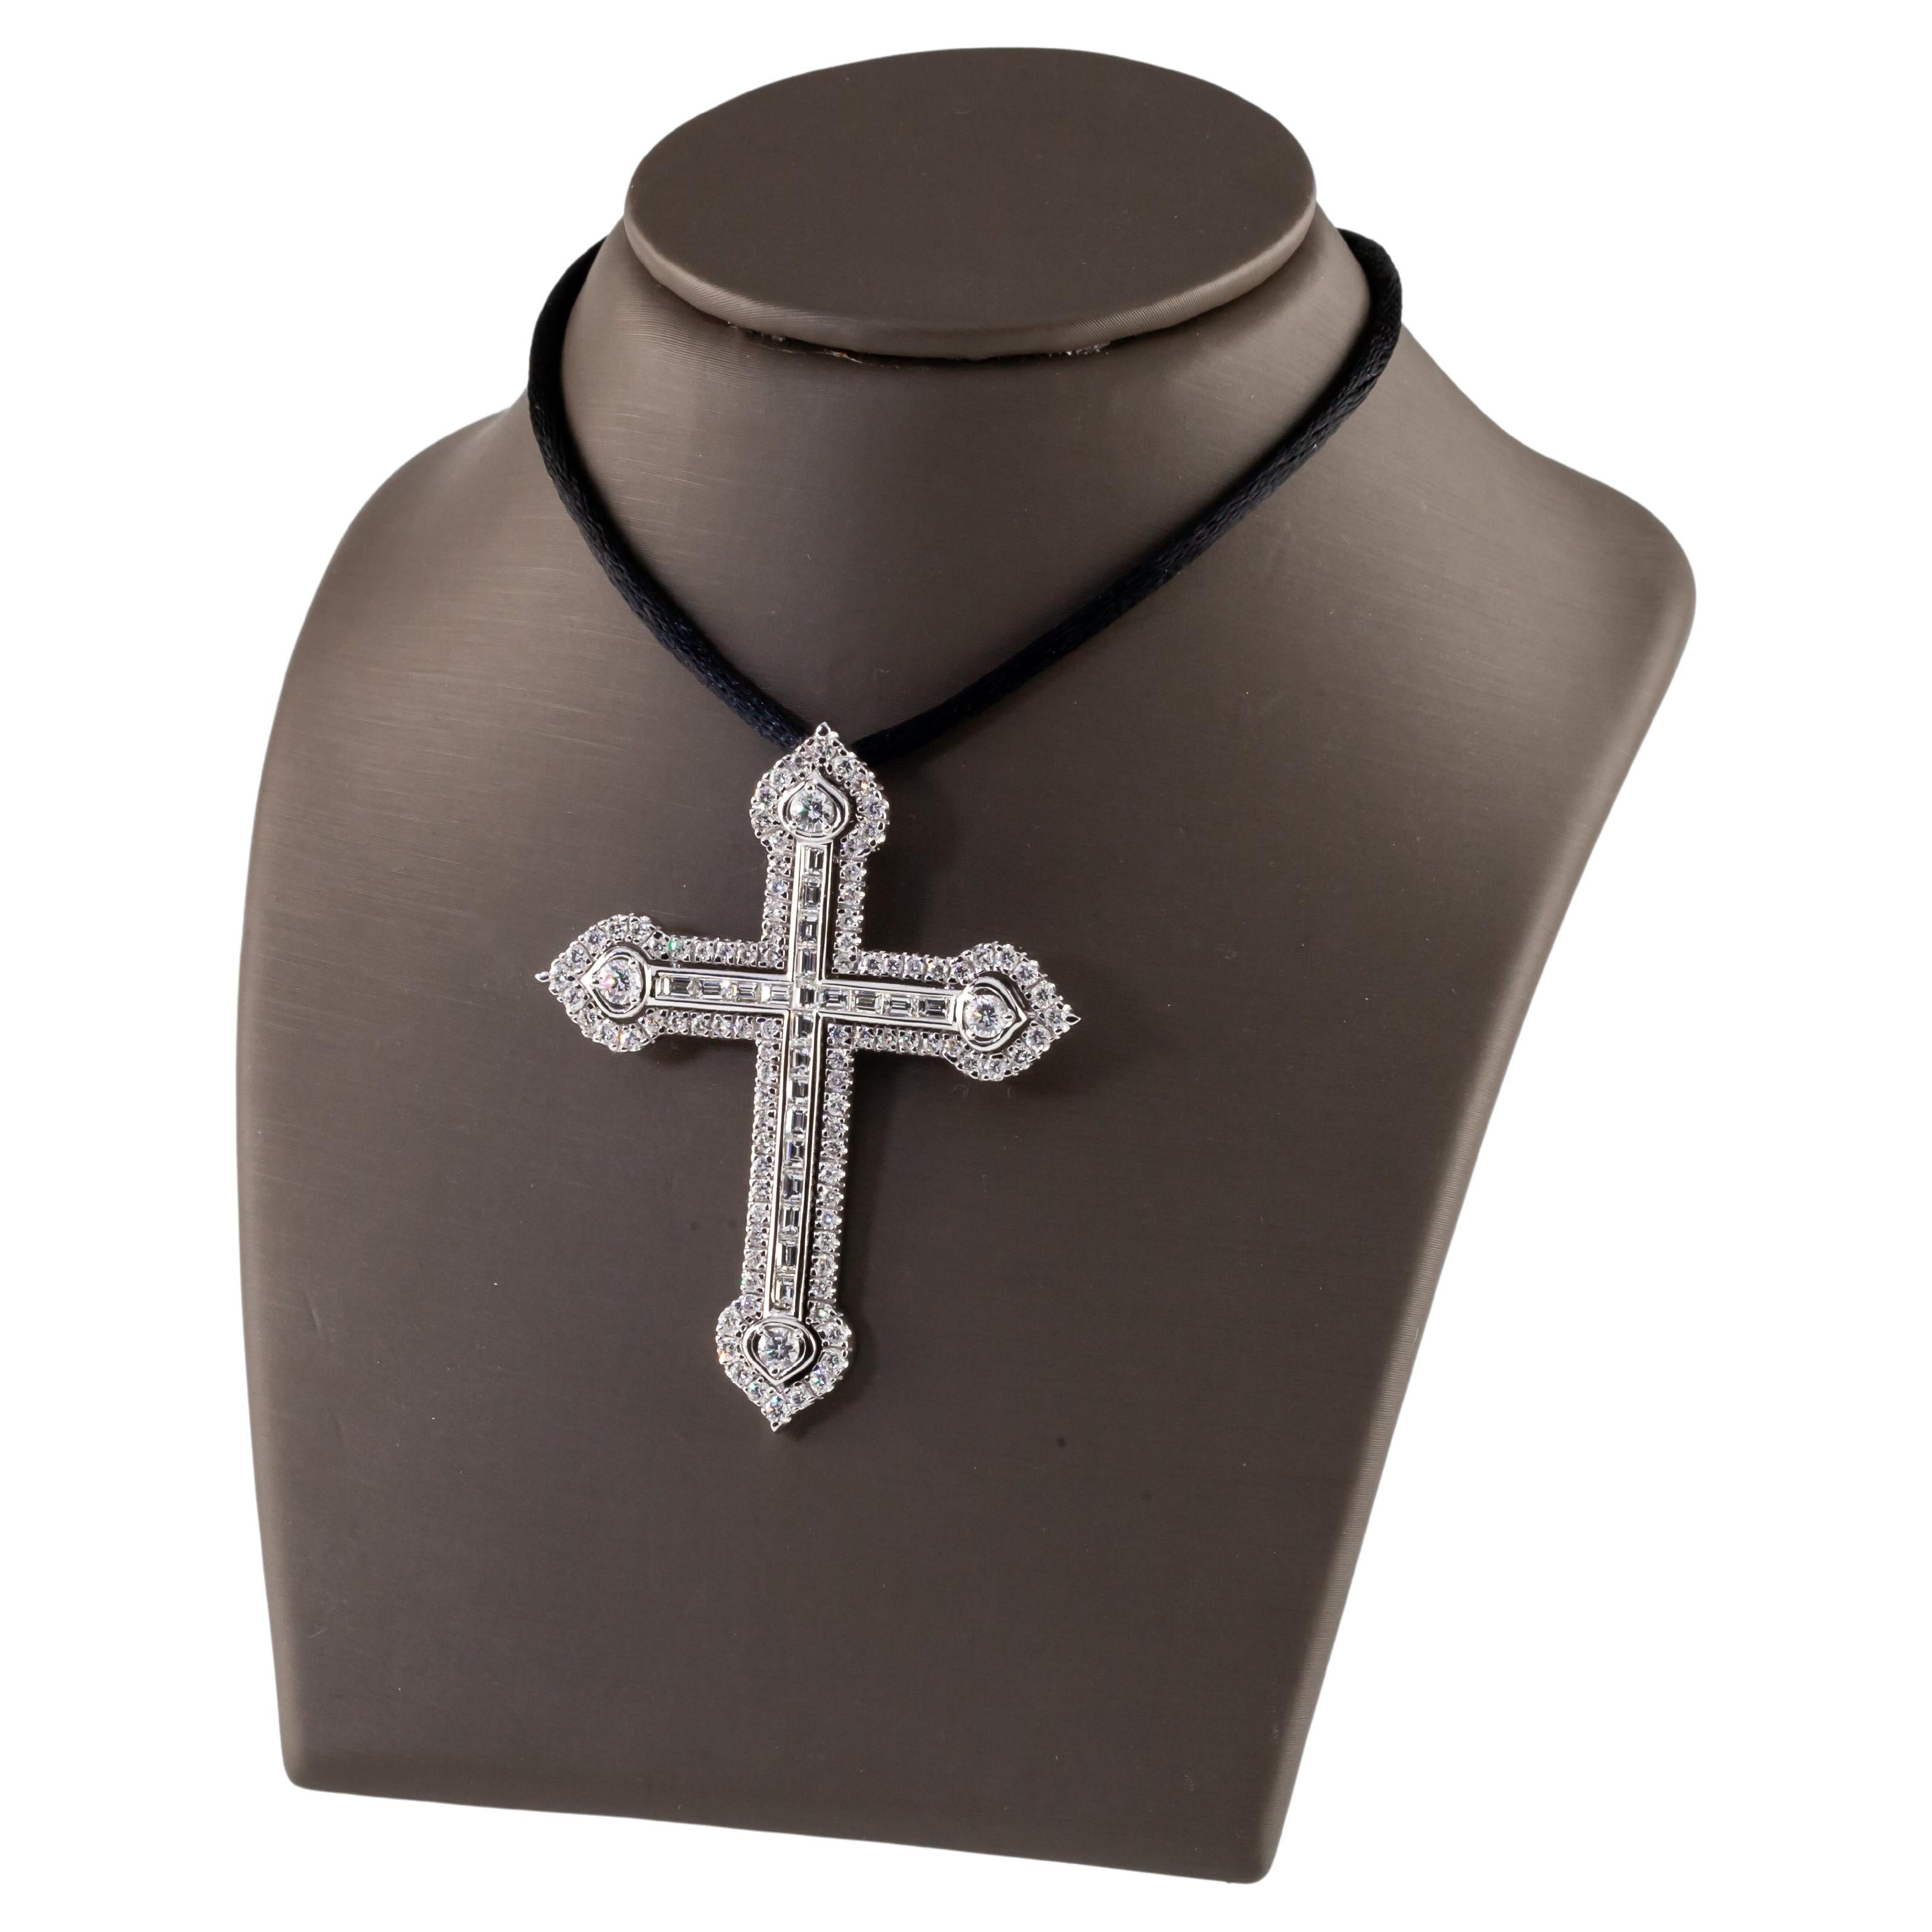 Gorgeous Diamond Cross Pendant in 18k White Gold
Features Channel Set Baguette Diamonds on Interior of Cross with Pave Set Round Diamond Bezel
Each Terminus Has Single Prong Set Round Solitare Stone
Total Diamond Weight = Appx 3 Carats
Average Color